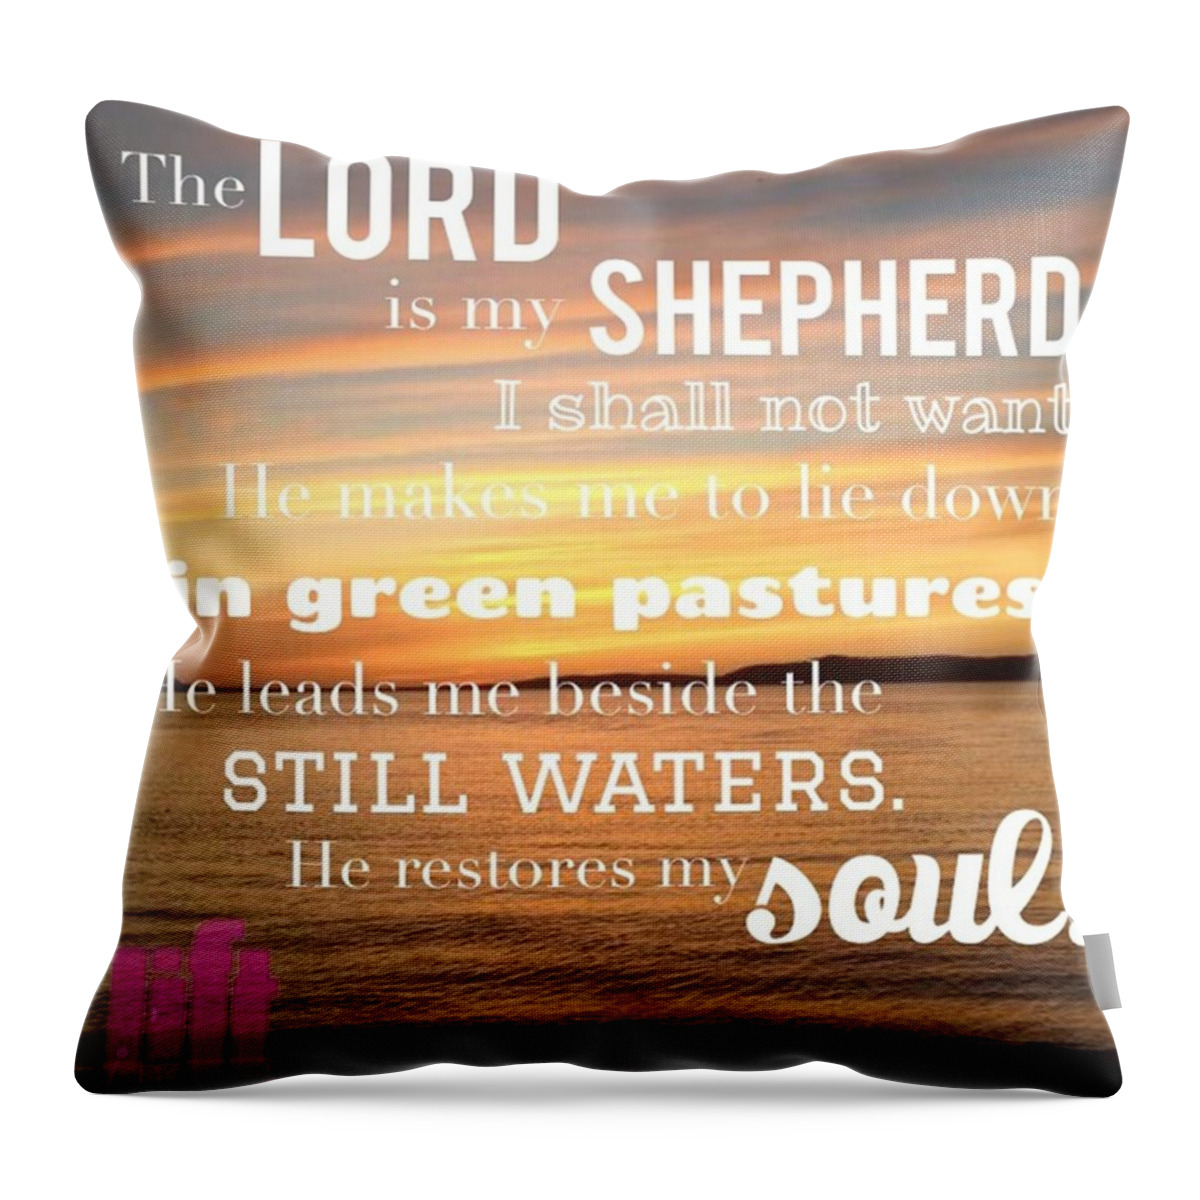 Thelordismyshepherd Throw Pillow featuring the photograph The Lord Is My Shepherd;
i Shall Not by LIFT Women's Ministry designs --by Julie Hurttgam